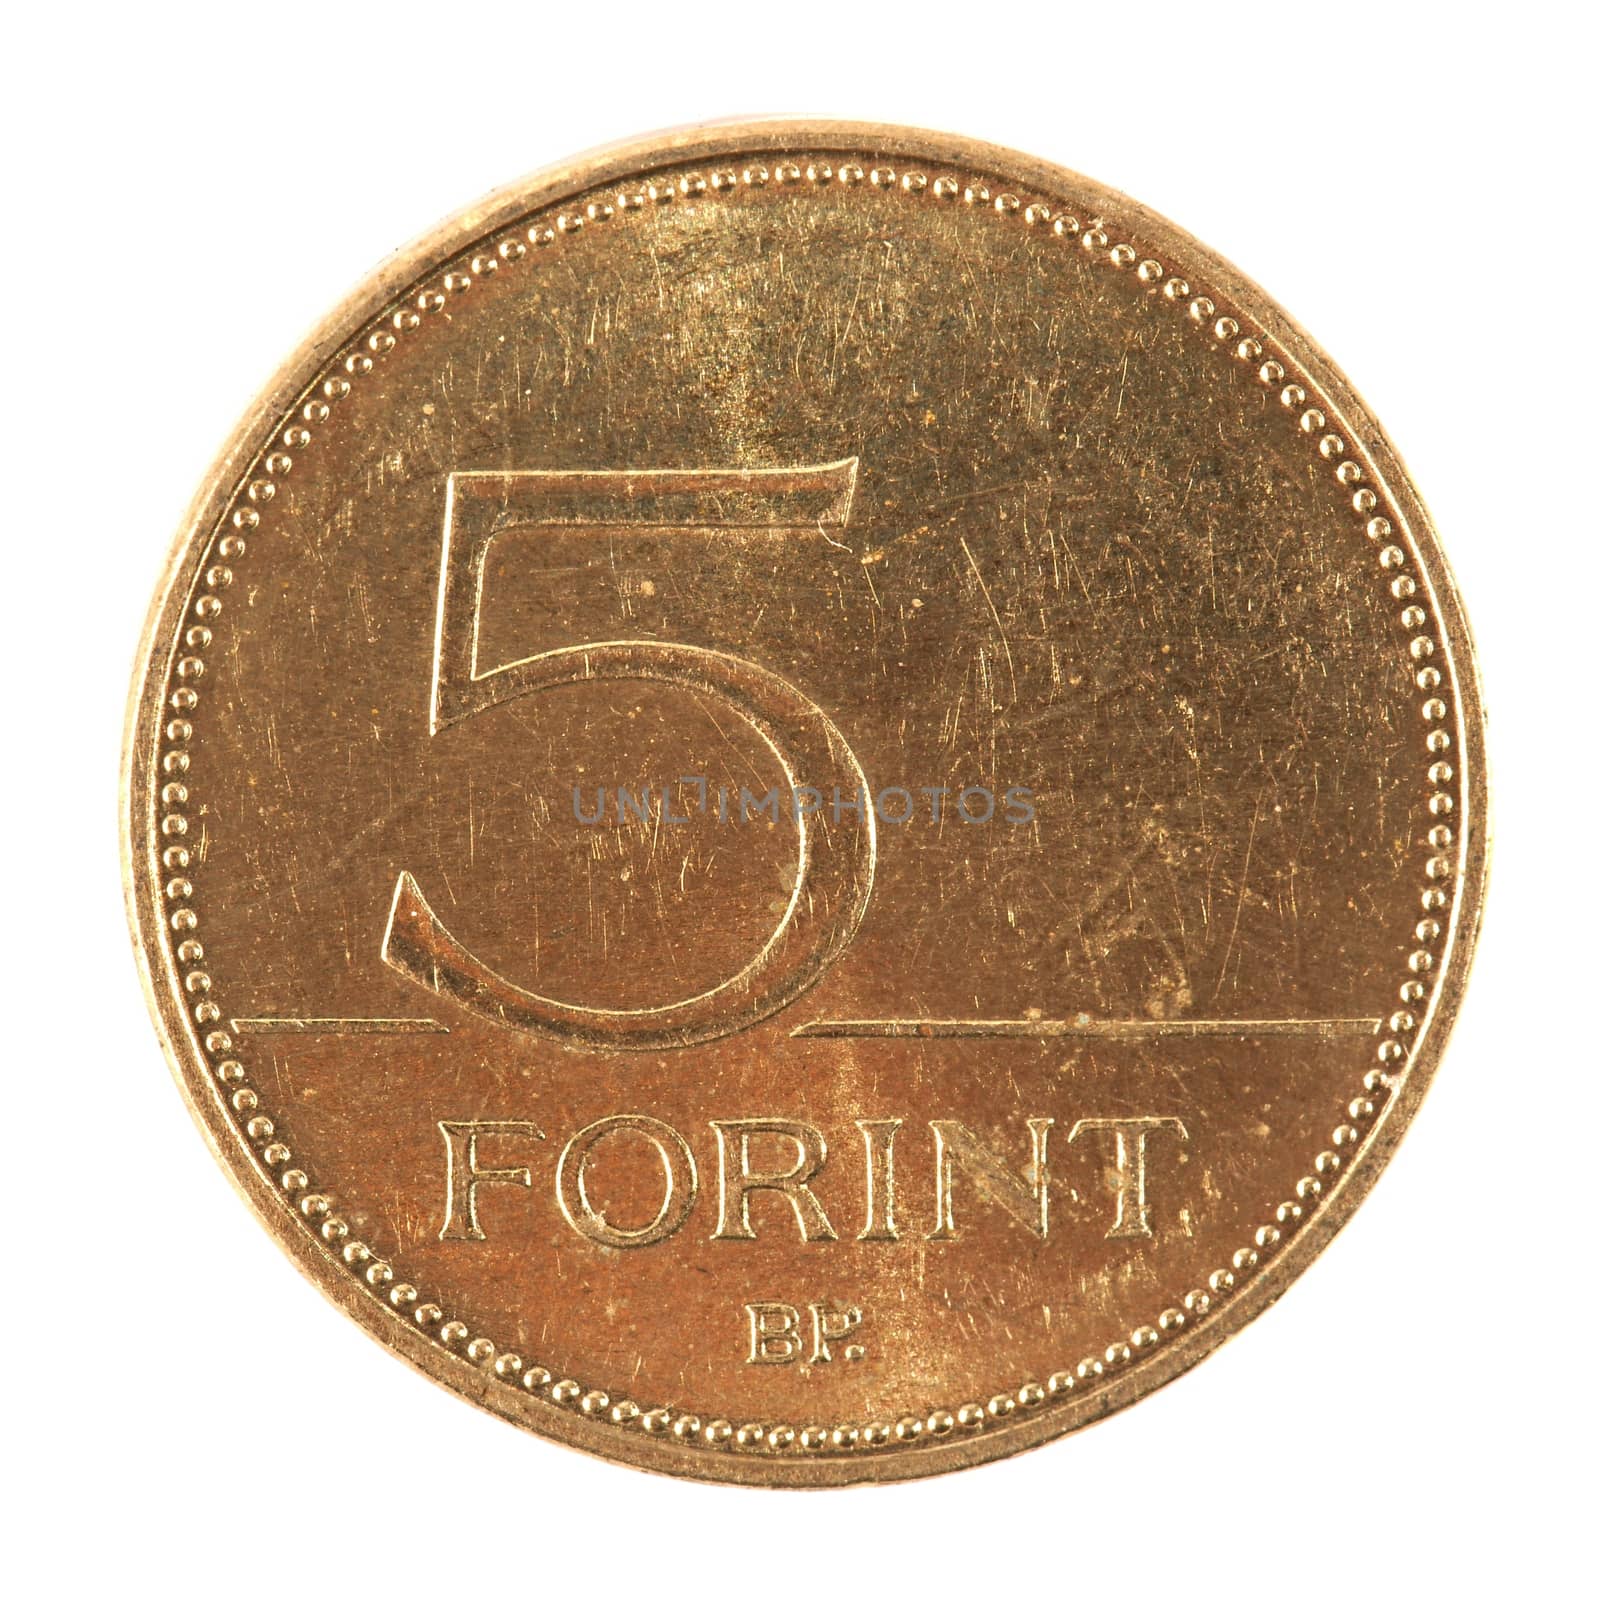 5 Hungarian forints coin on white background